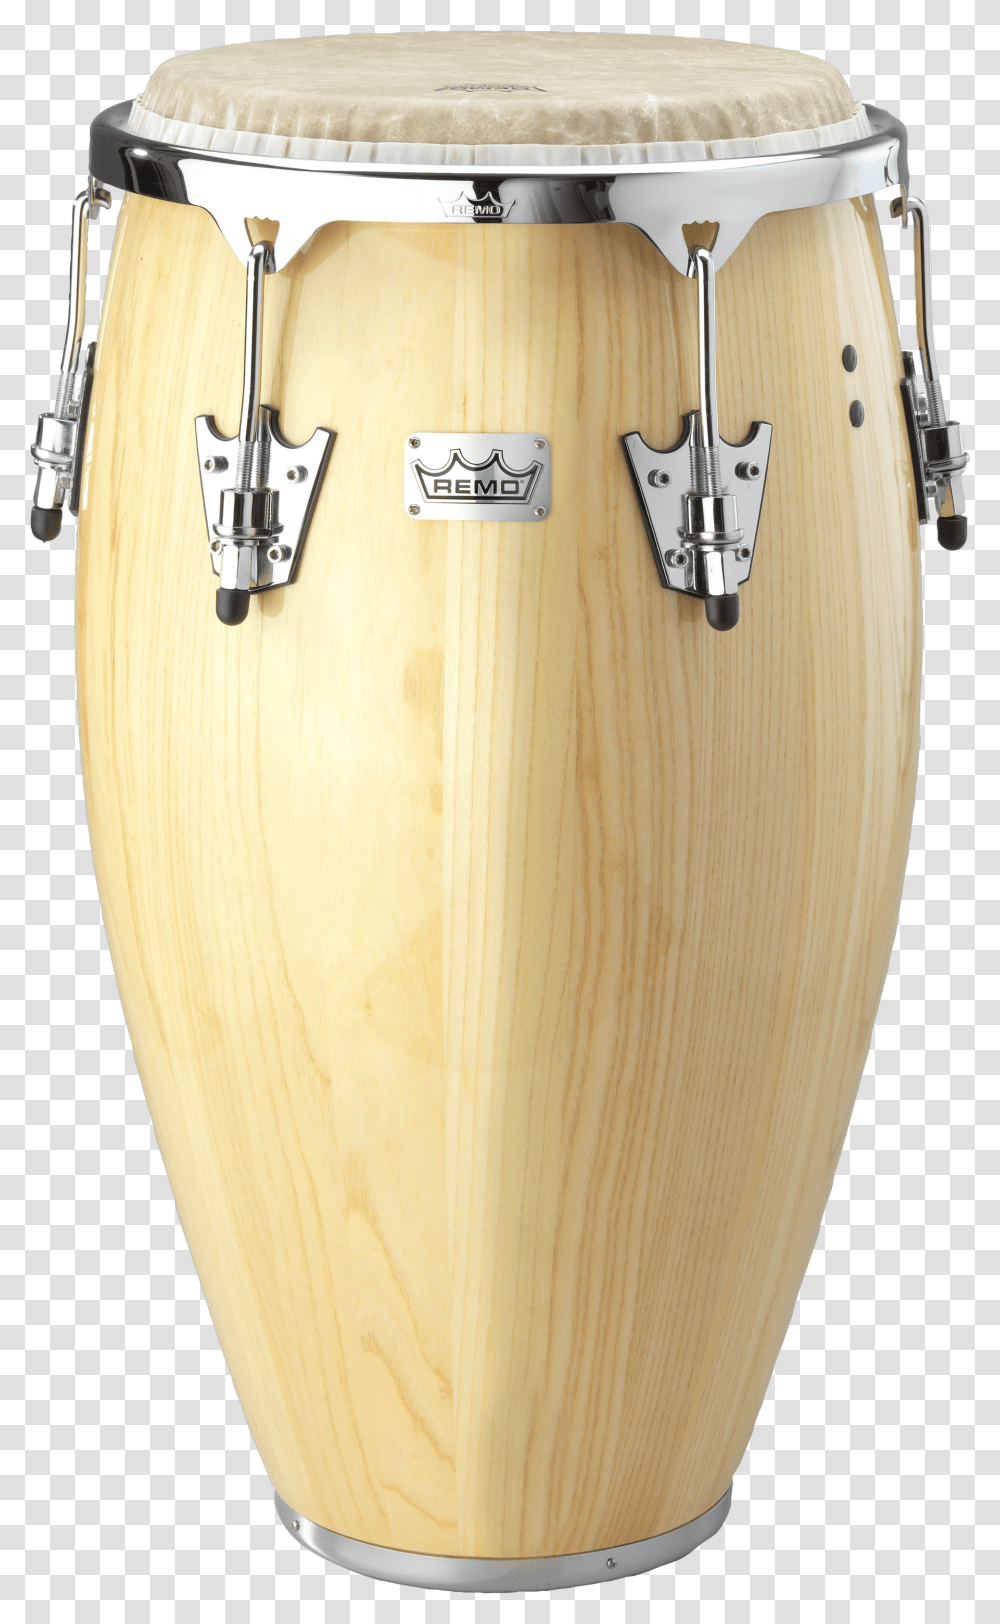 Crown Percussion Conga Drum Remo Crown Percussion Congas, Lamp, Musical Instrument, Leisure Activities Transparent Png